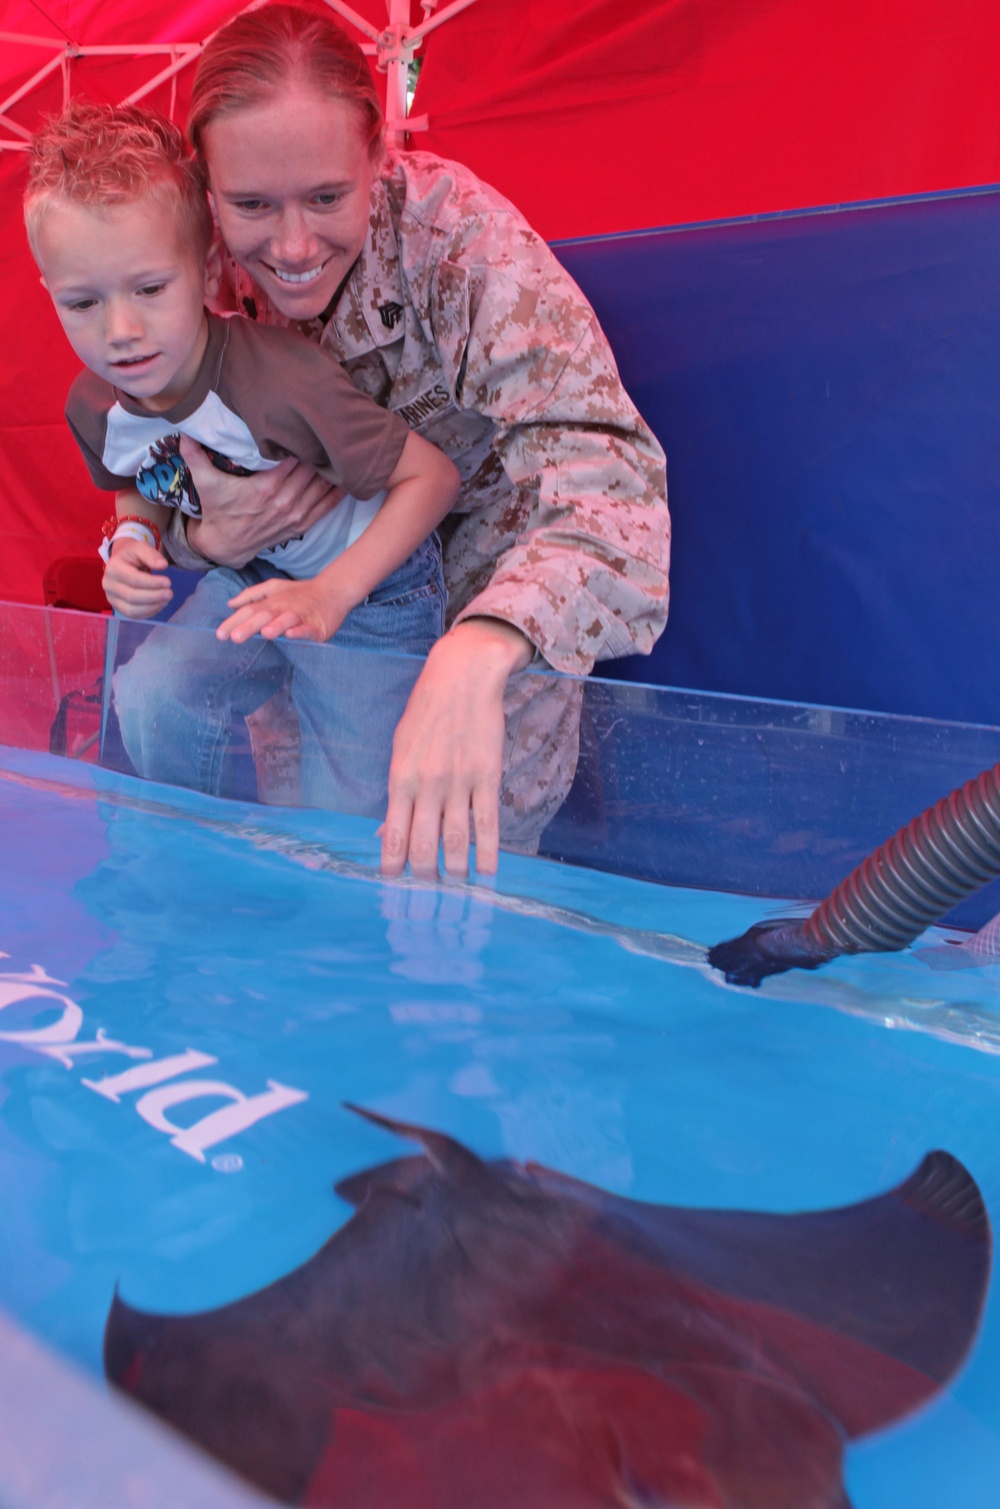 SeaWorld Animal Show makes splash during Month of the Military Child